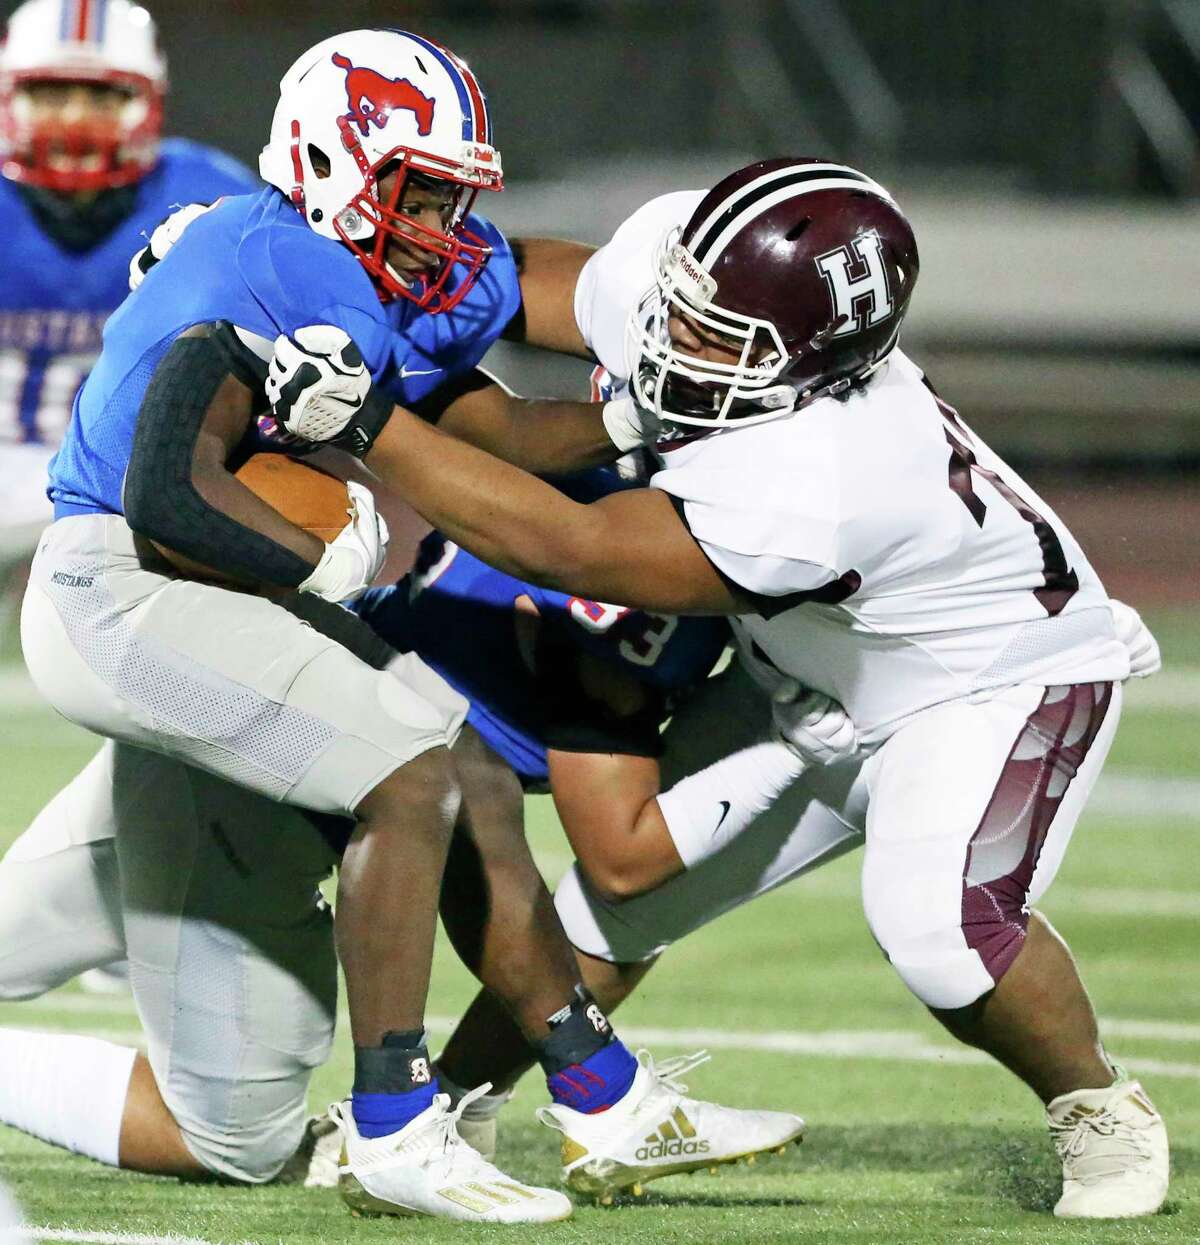 The Mustangs' Albert Slaughter is brought down by Owl defensive end Michael Flores as Highlands plays Jefferson in high school football at Alamo Stadium on Nov. 19, 2020